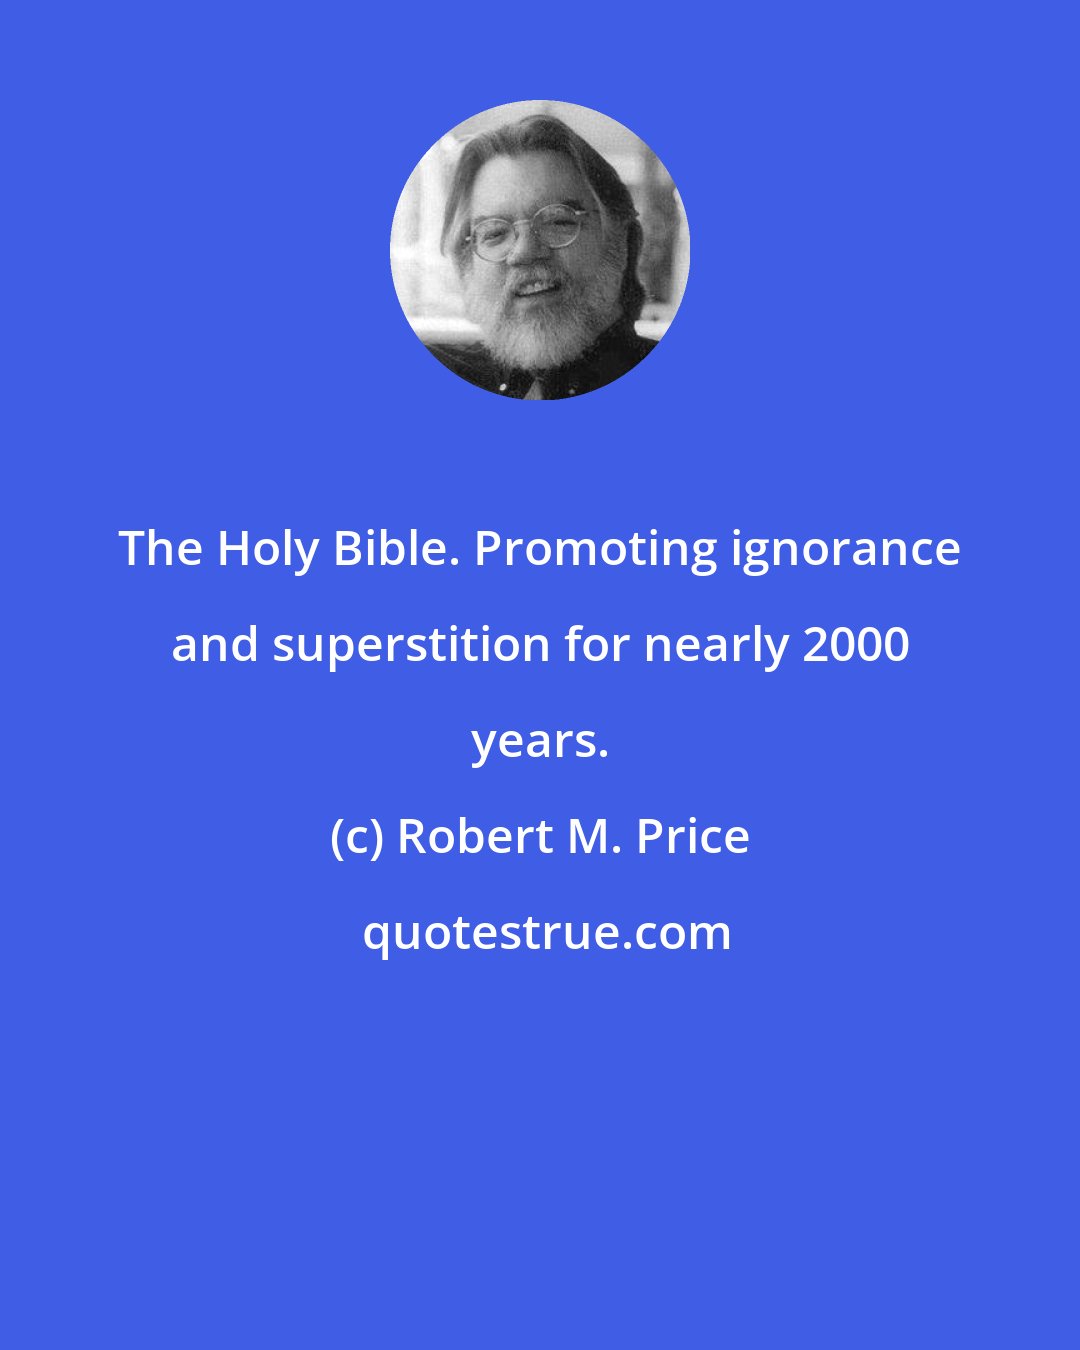 Robert M. Price: The Holy Bible. Promoting ignorance and superstition for nearly 2000 years.